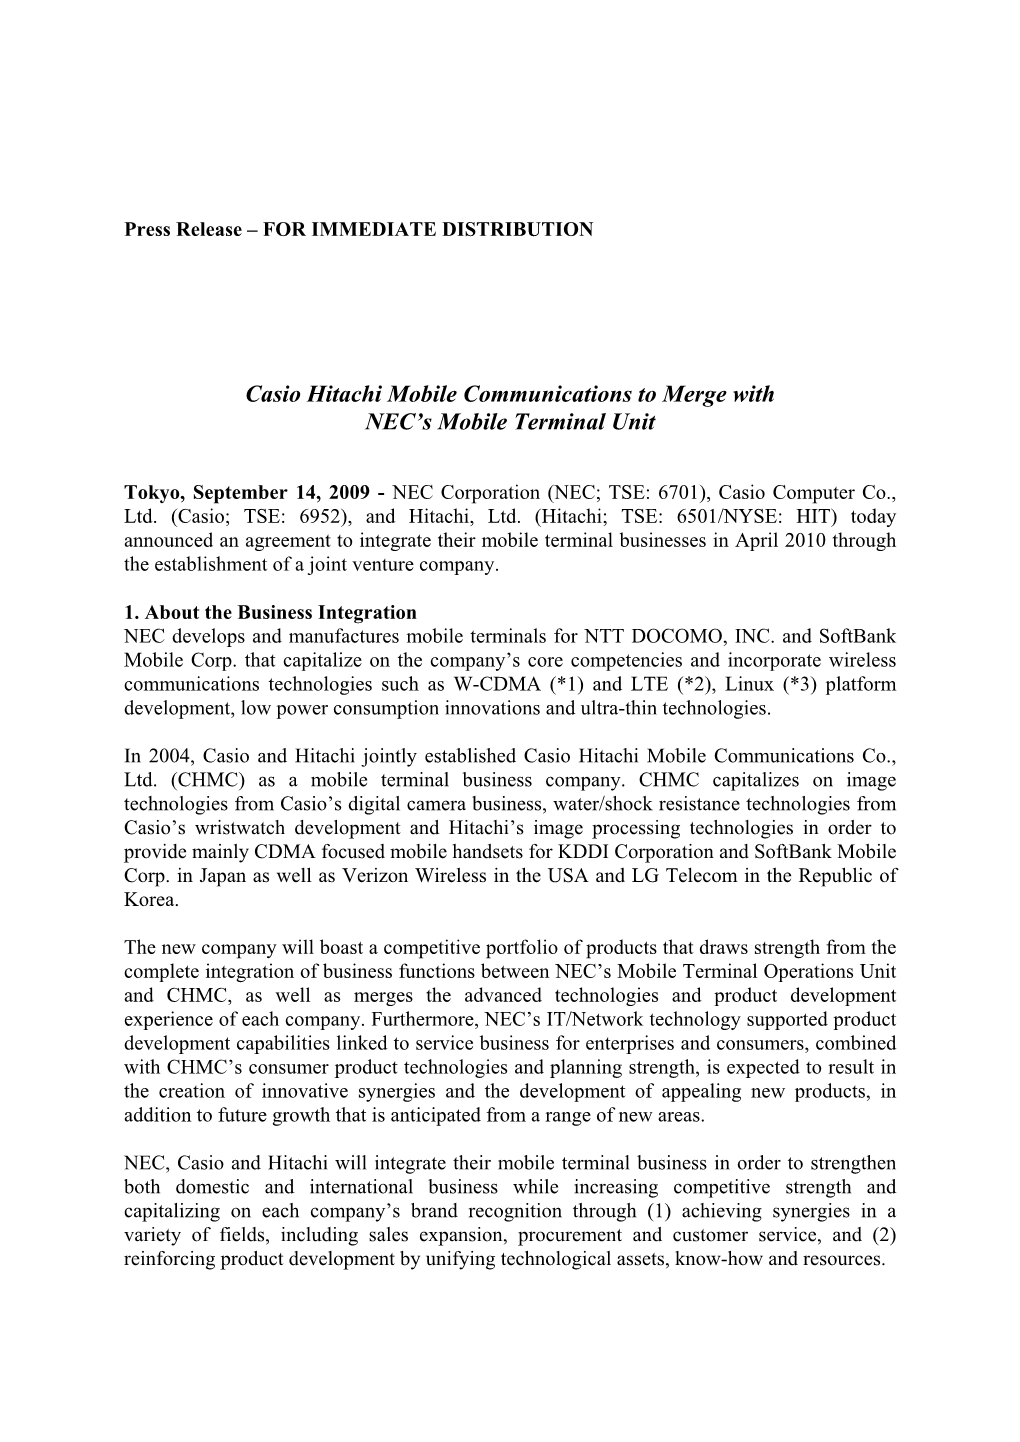 Casio Hitachi Mobile Communications to Merge with NEC's Mobile